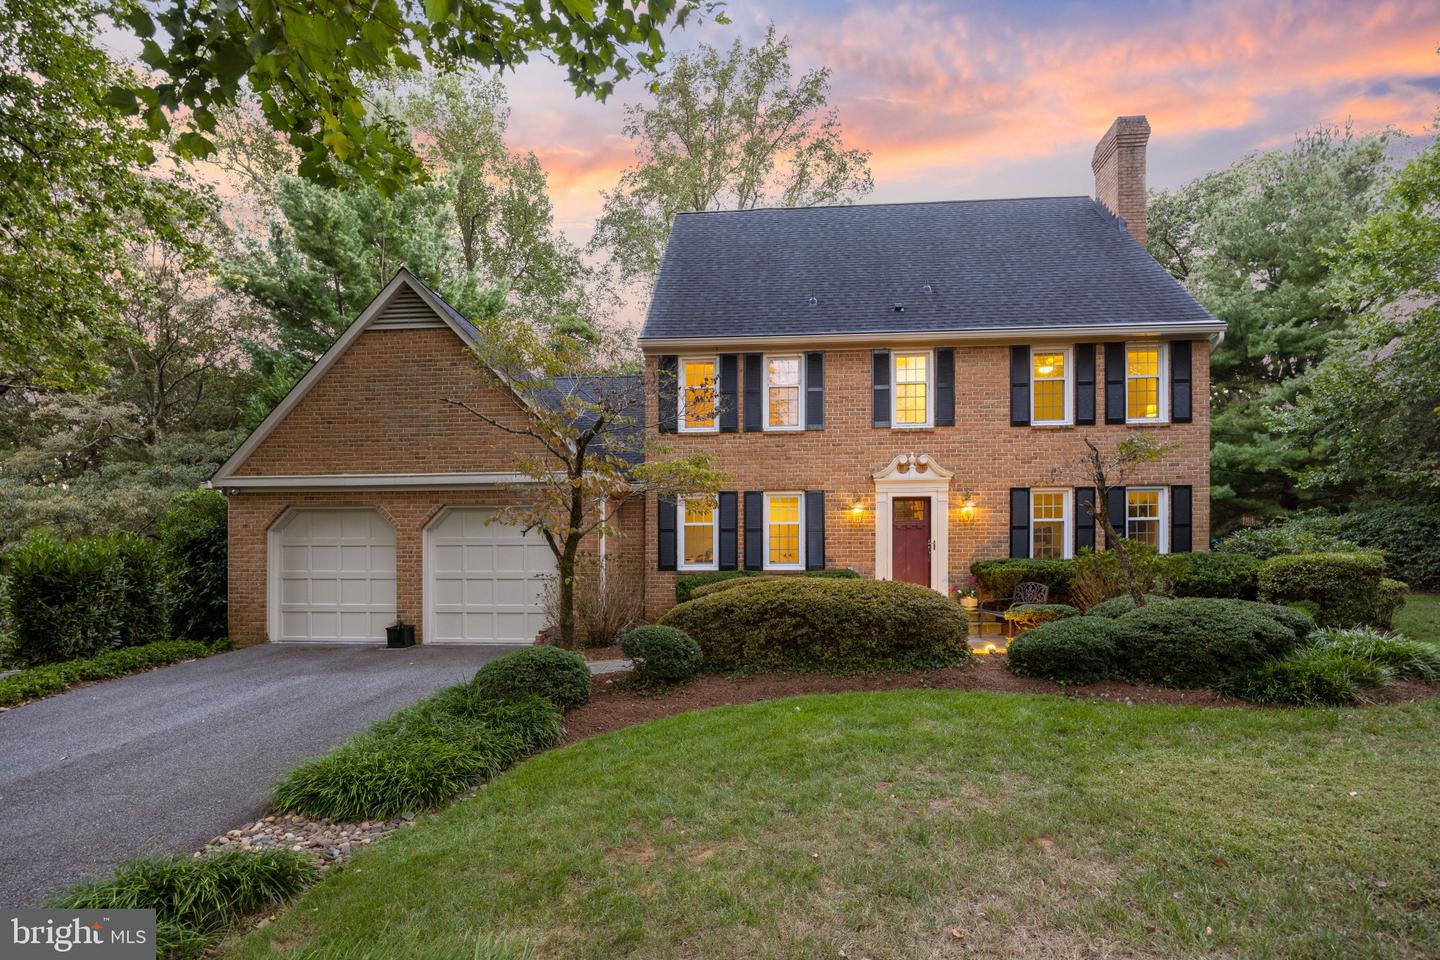 Anne Arundel County Real Estate & Homes for Sale March 30th, 2023